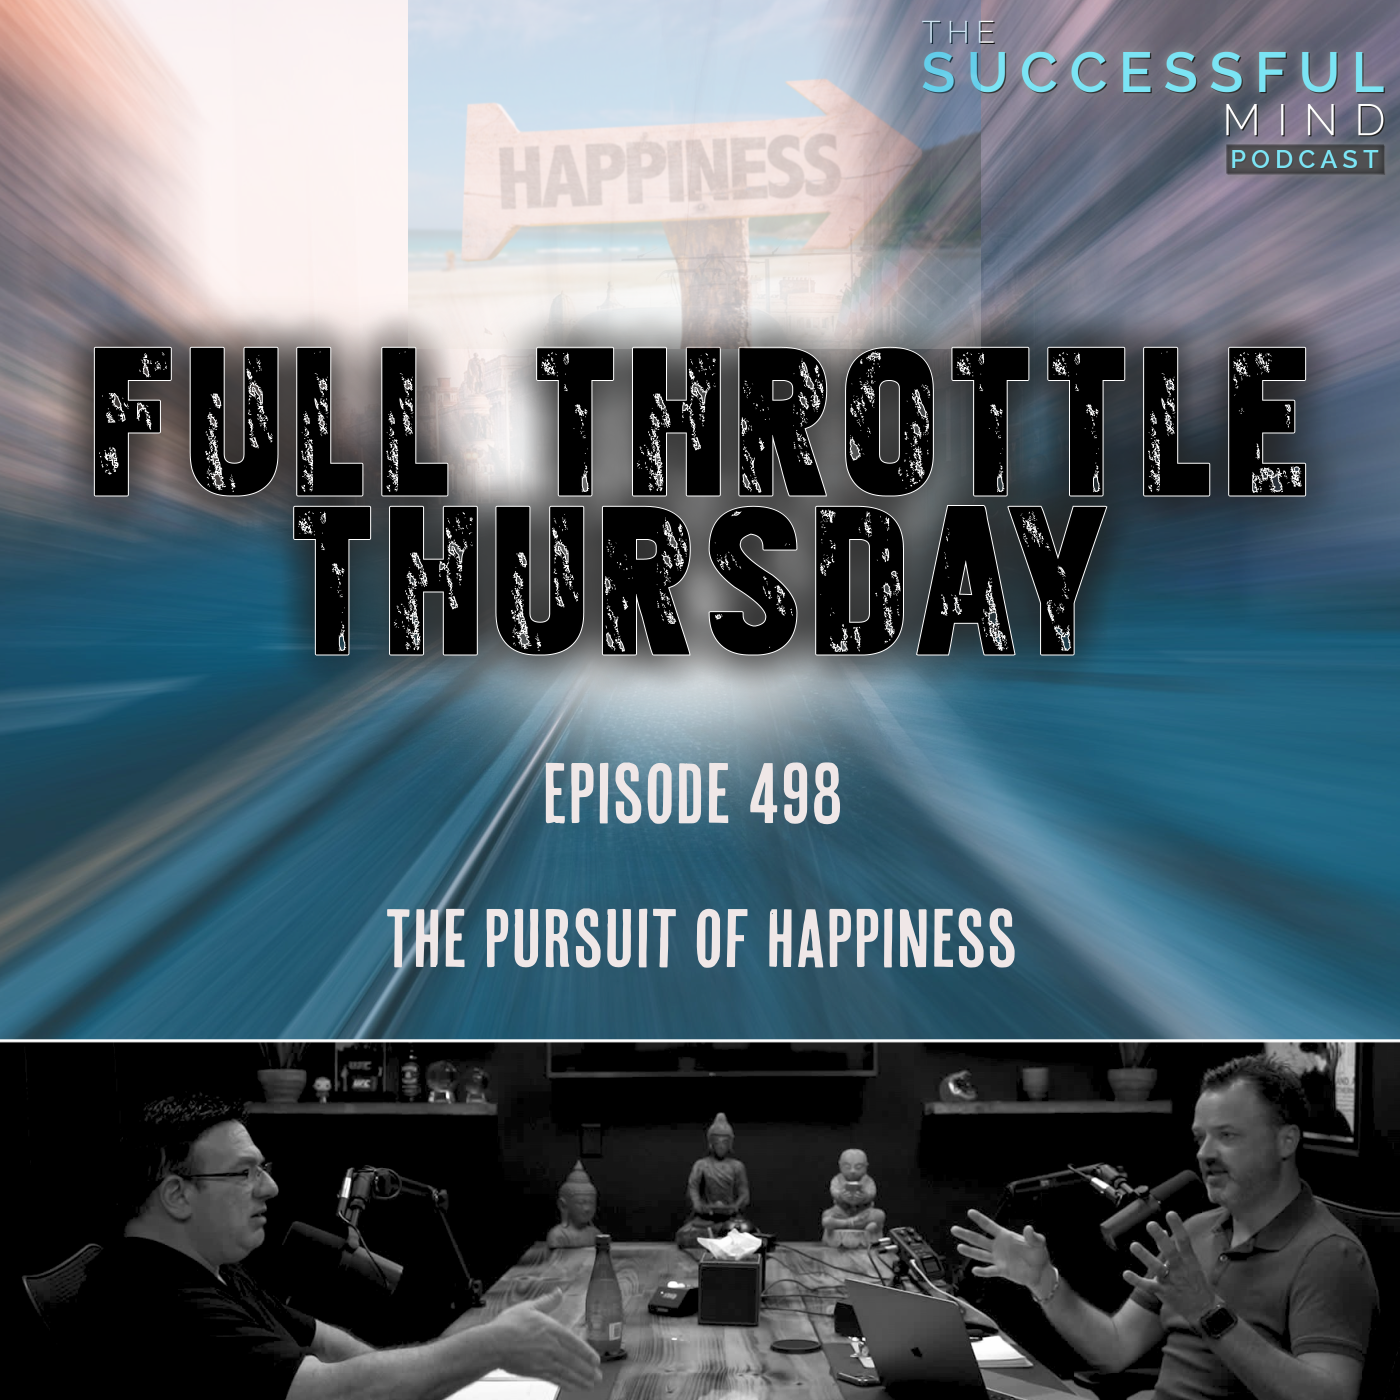 The Successful Mind Podcast - Full Throttle Thursday - The Pursuit of Happiness